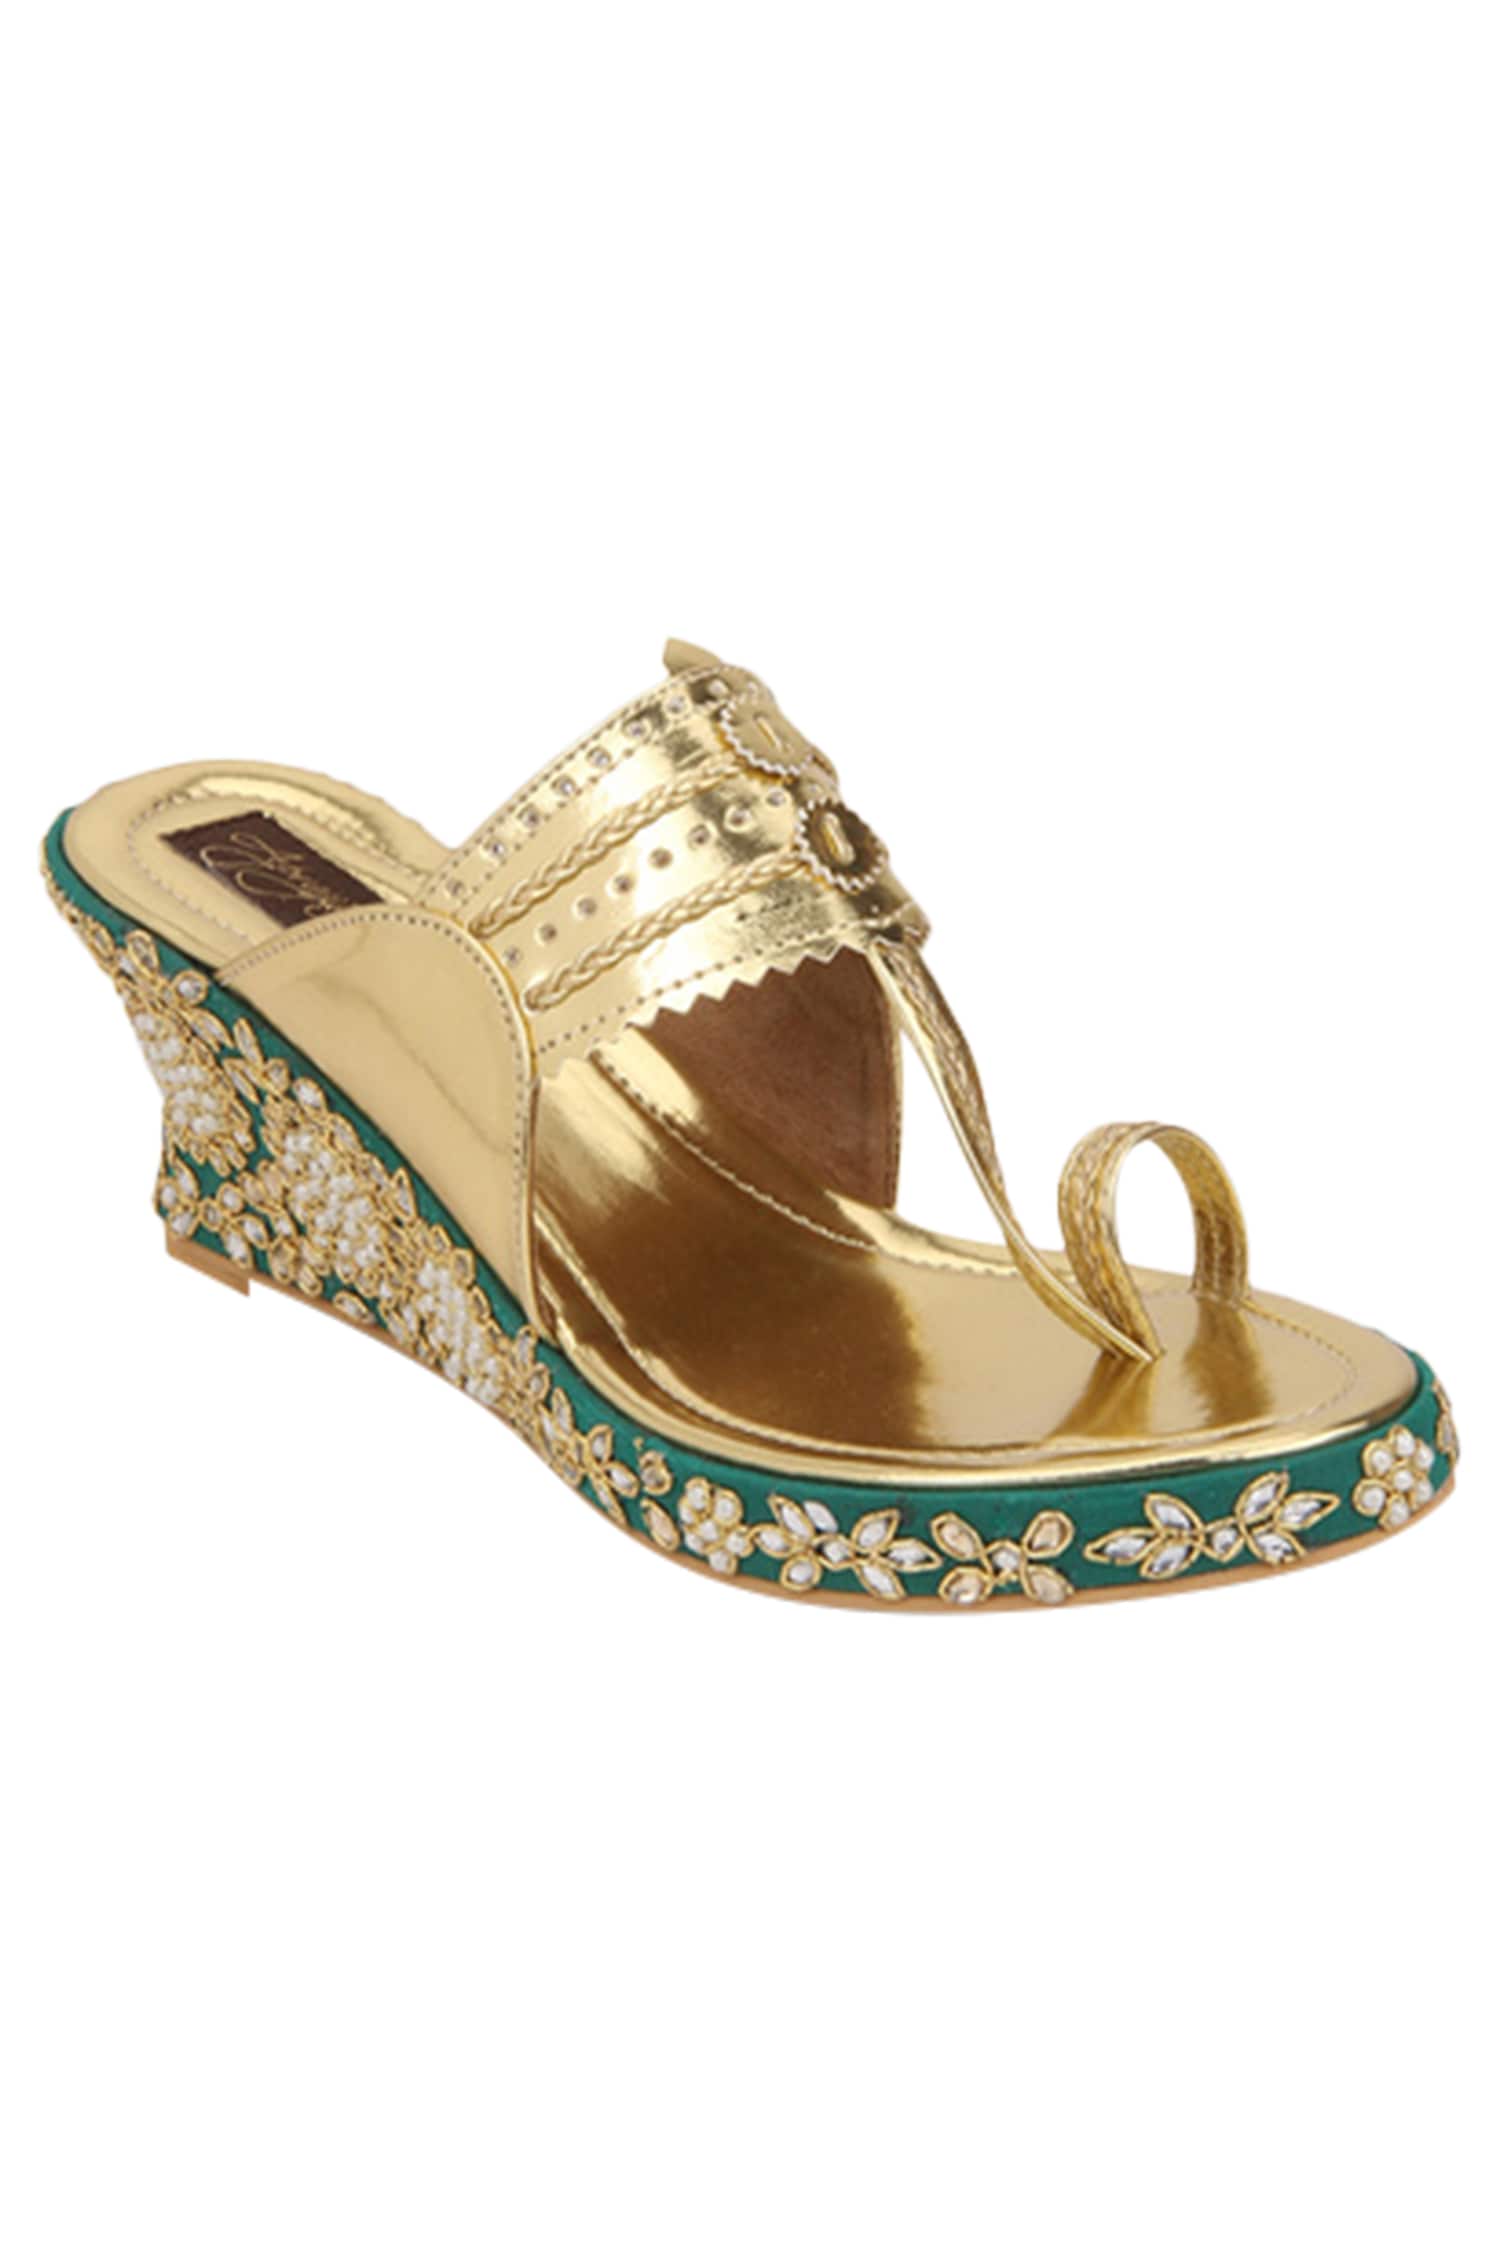 Buy Gold Embroidered Floral Wedges by Aprajita Toor Online at Aza Fashions.